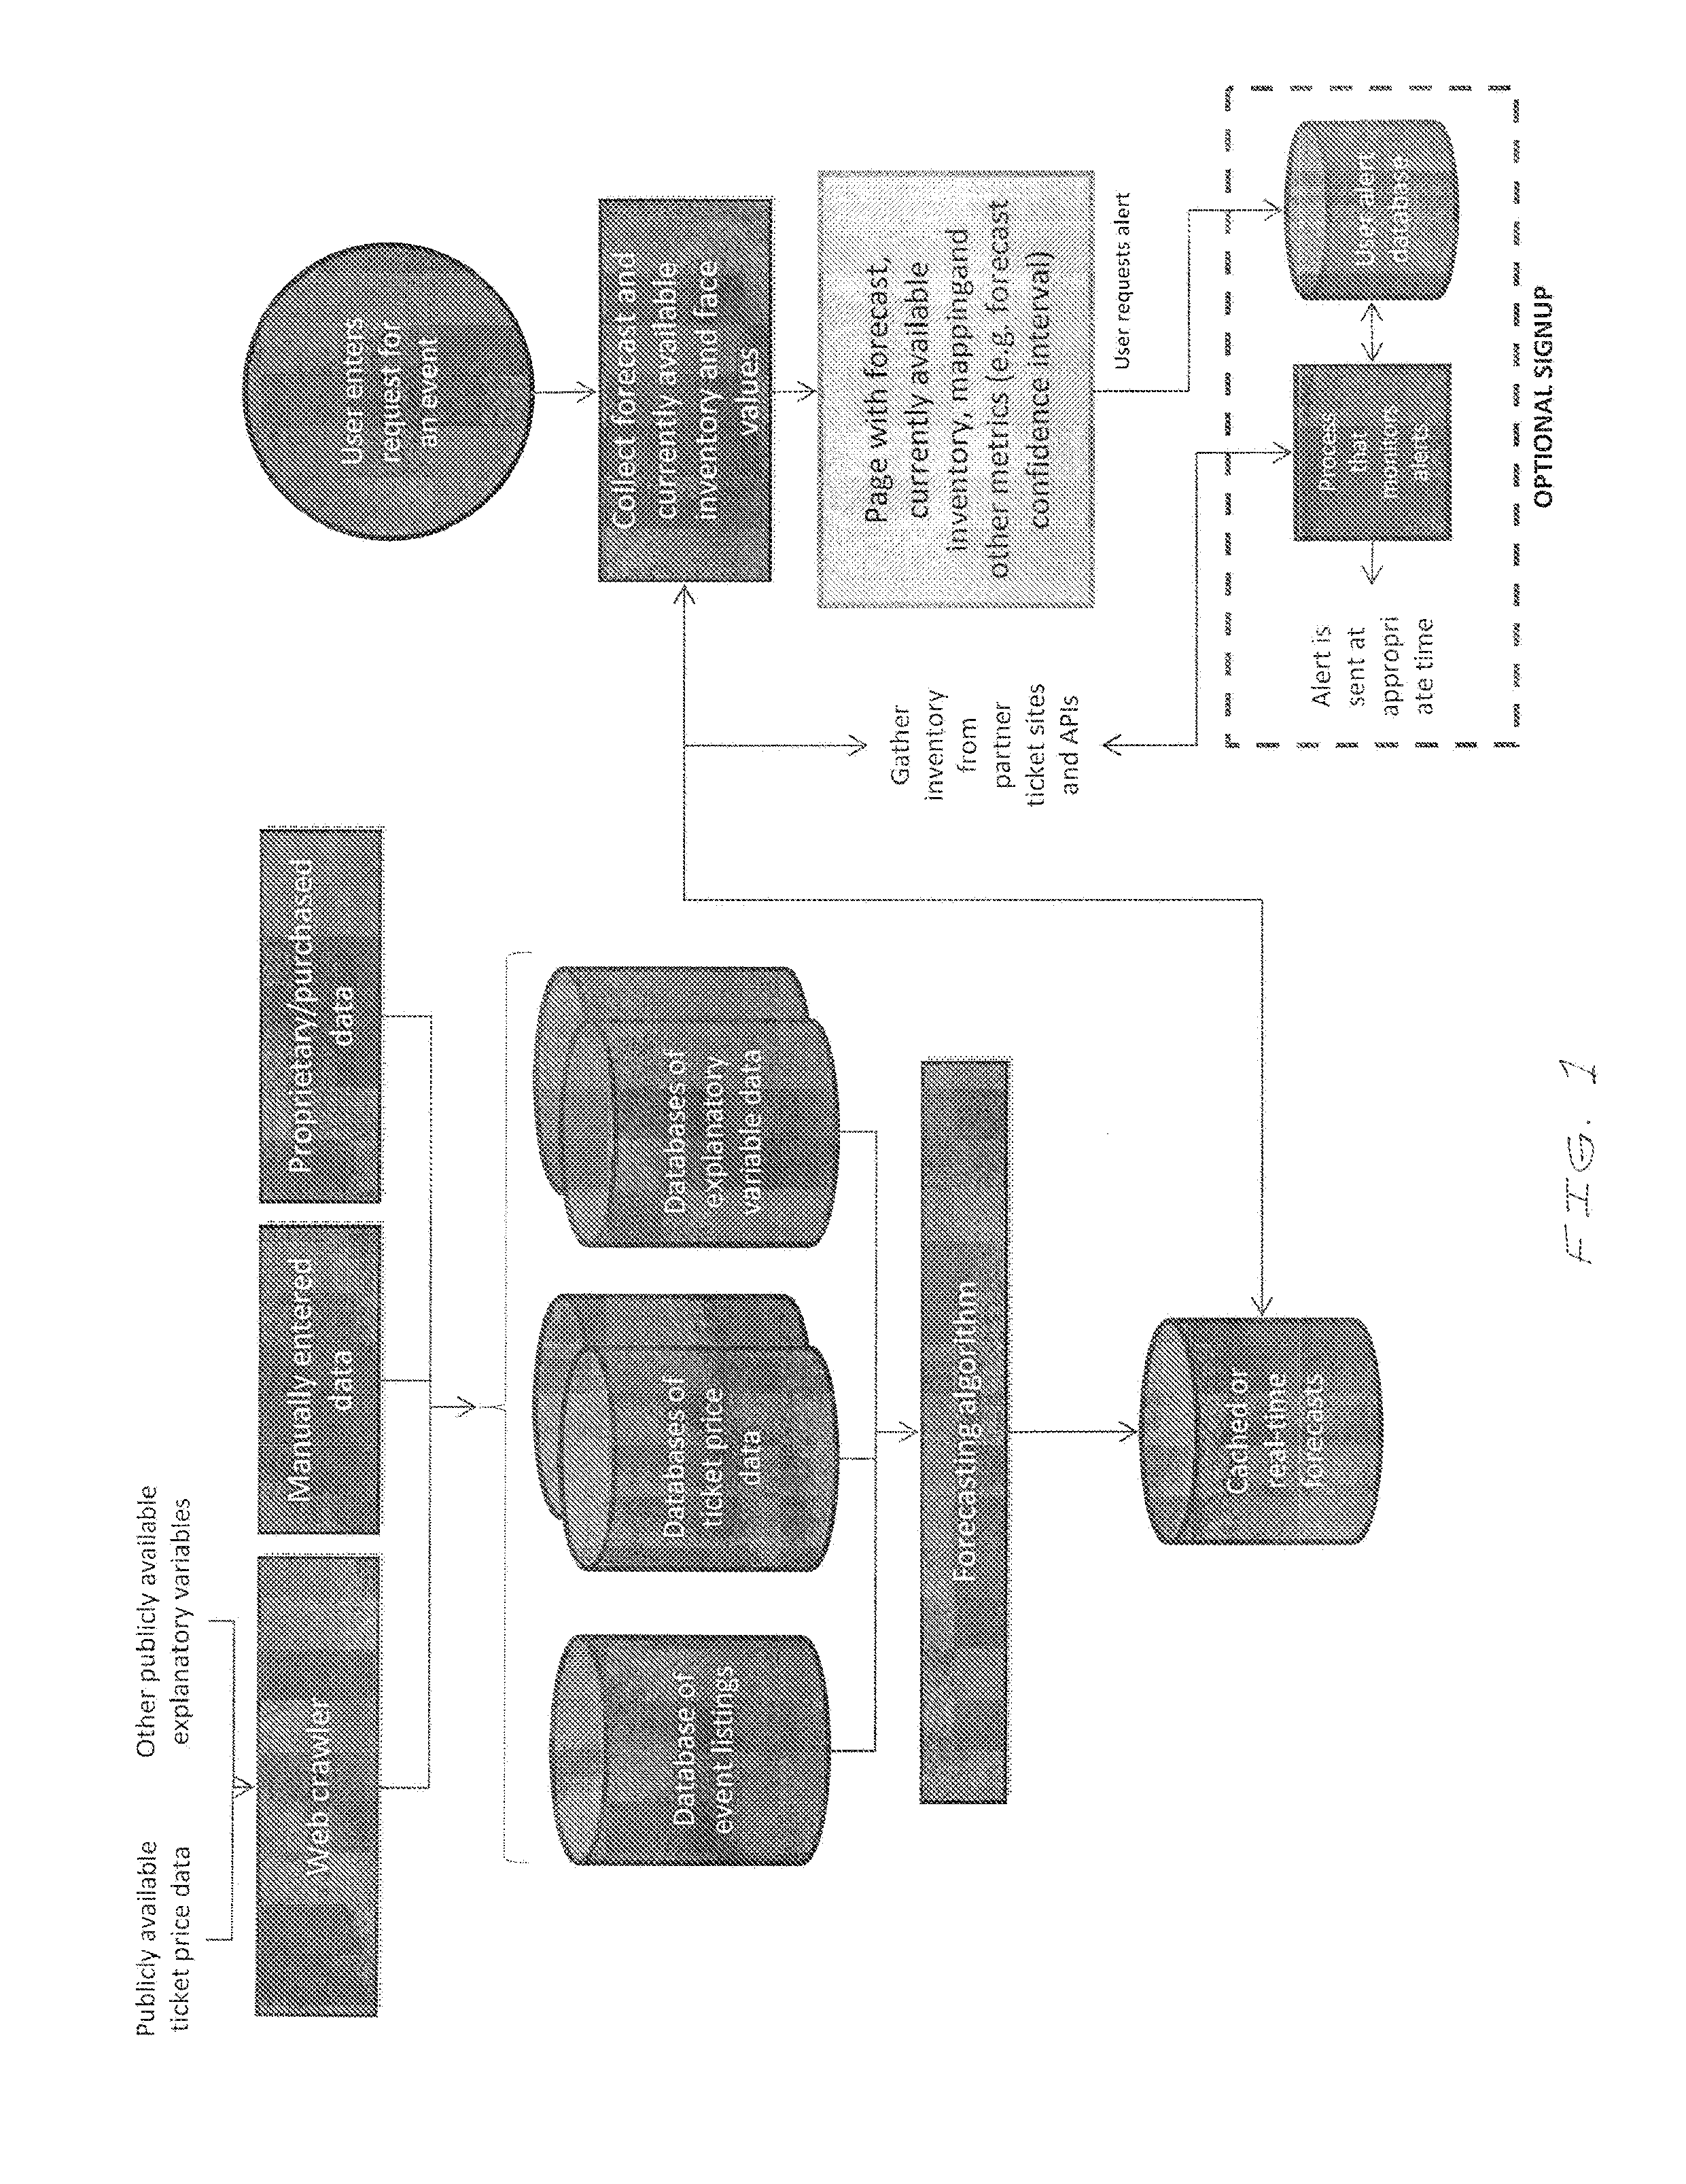 System and method for generating predictions of price and availability of event tickets on secondary markets